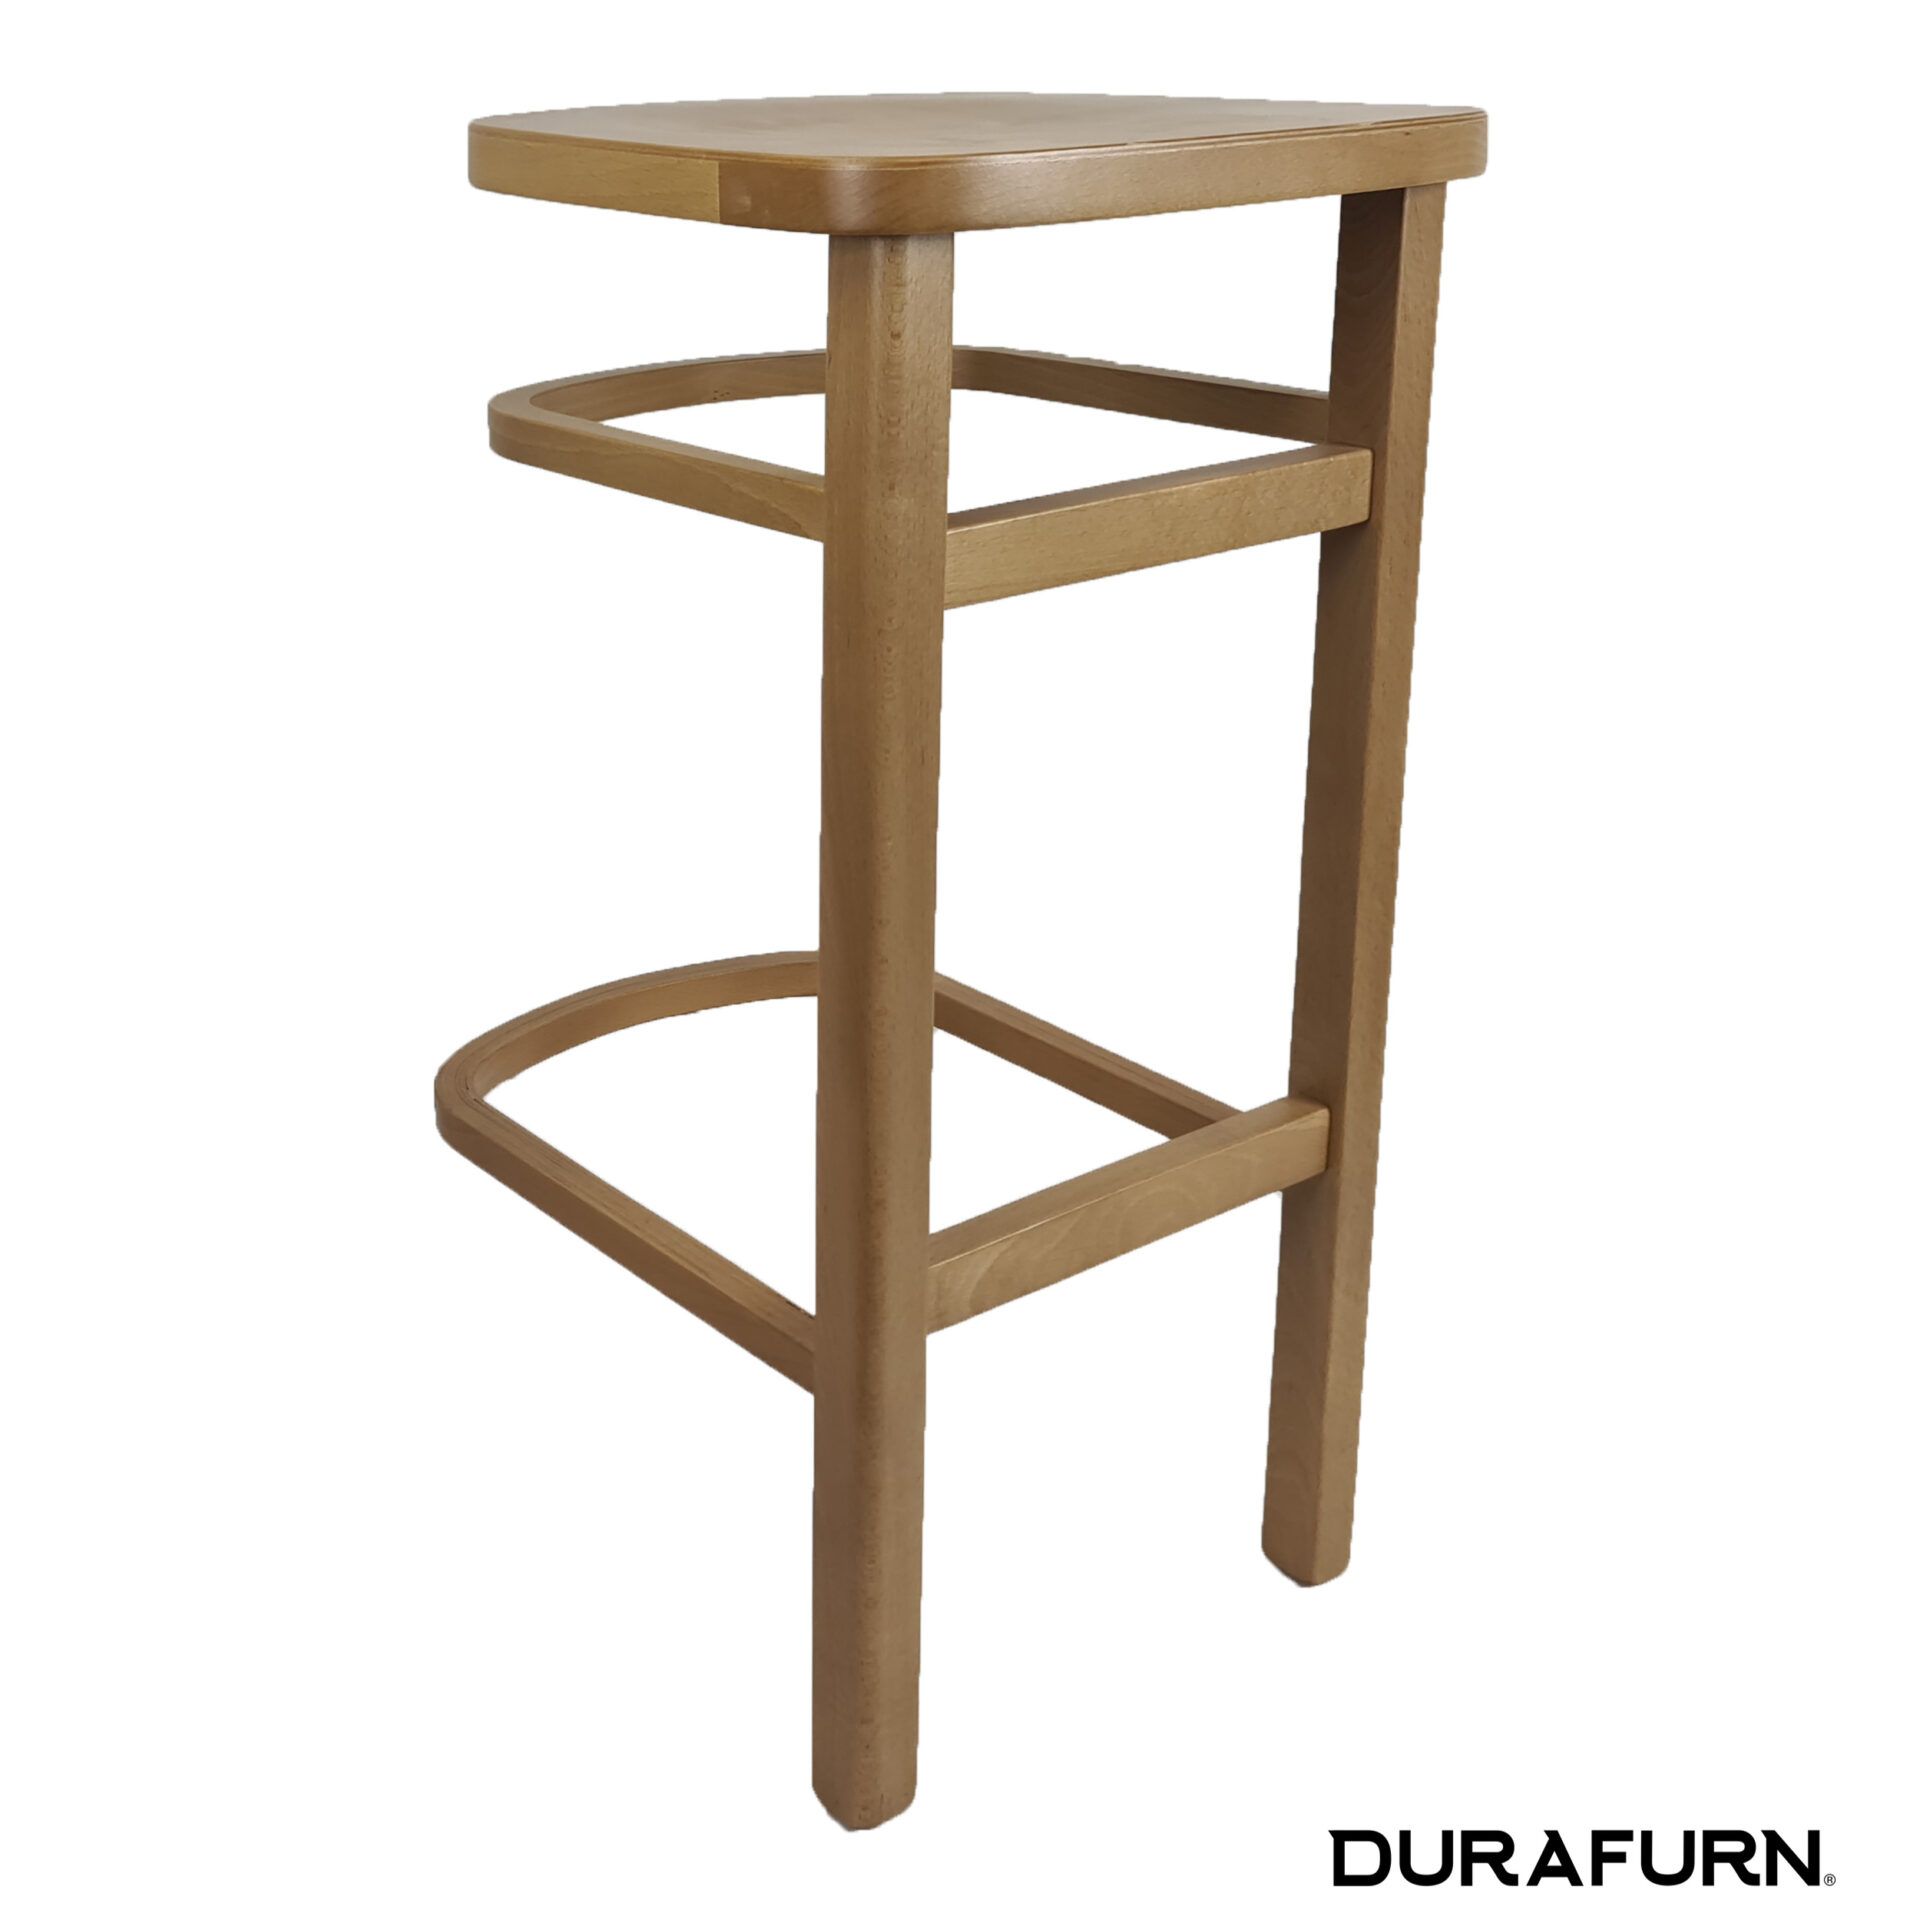 PART Vienna Barstool Seat Frame - Natural - Ply Seat